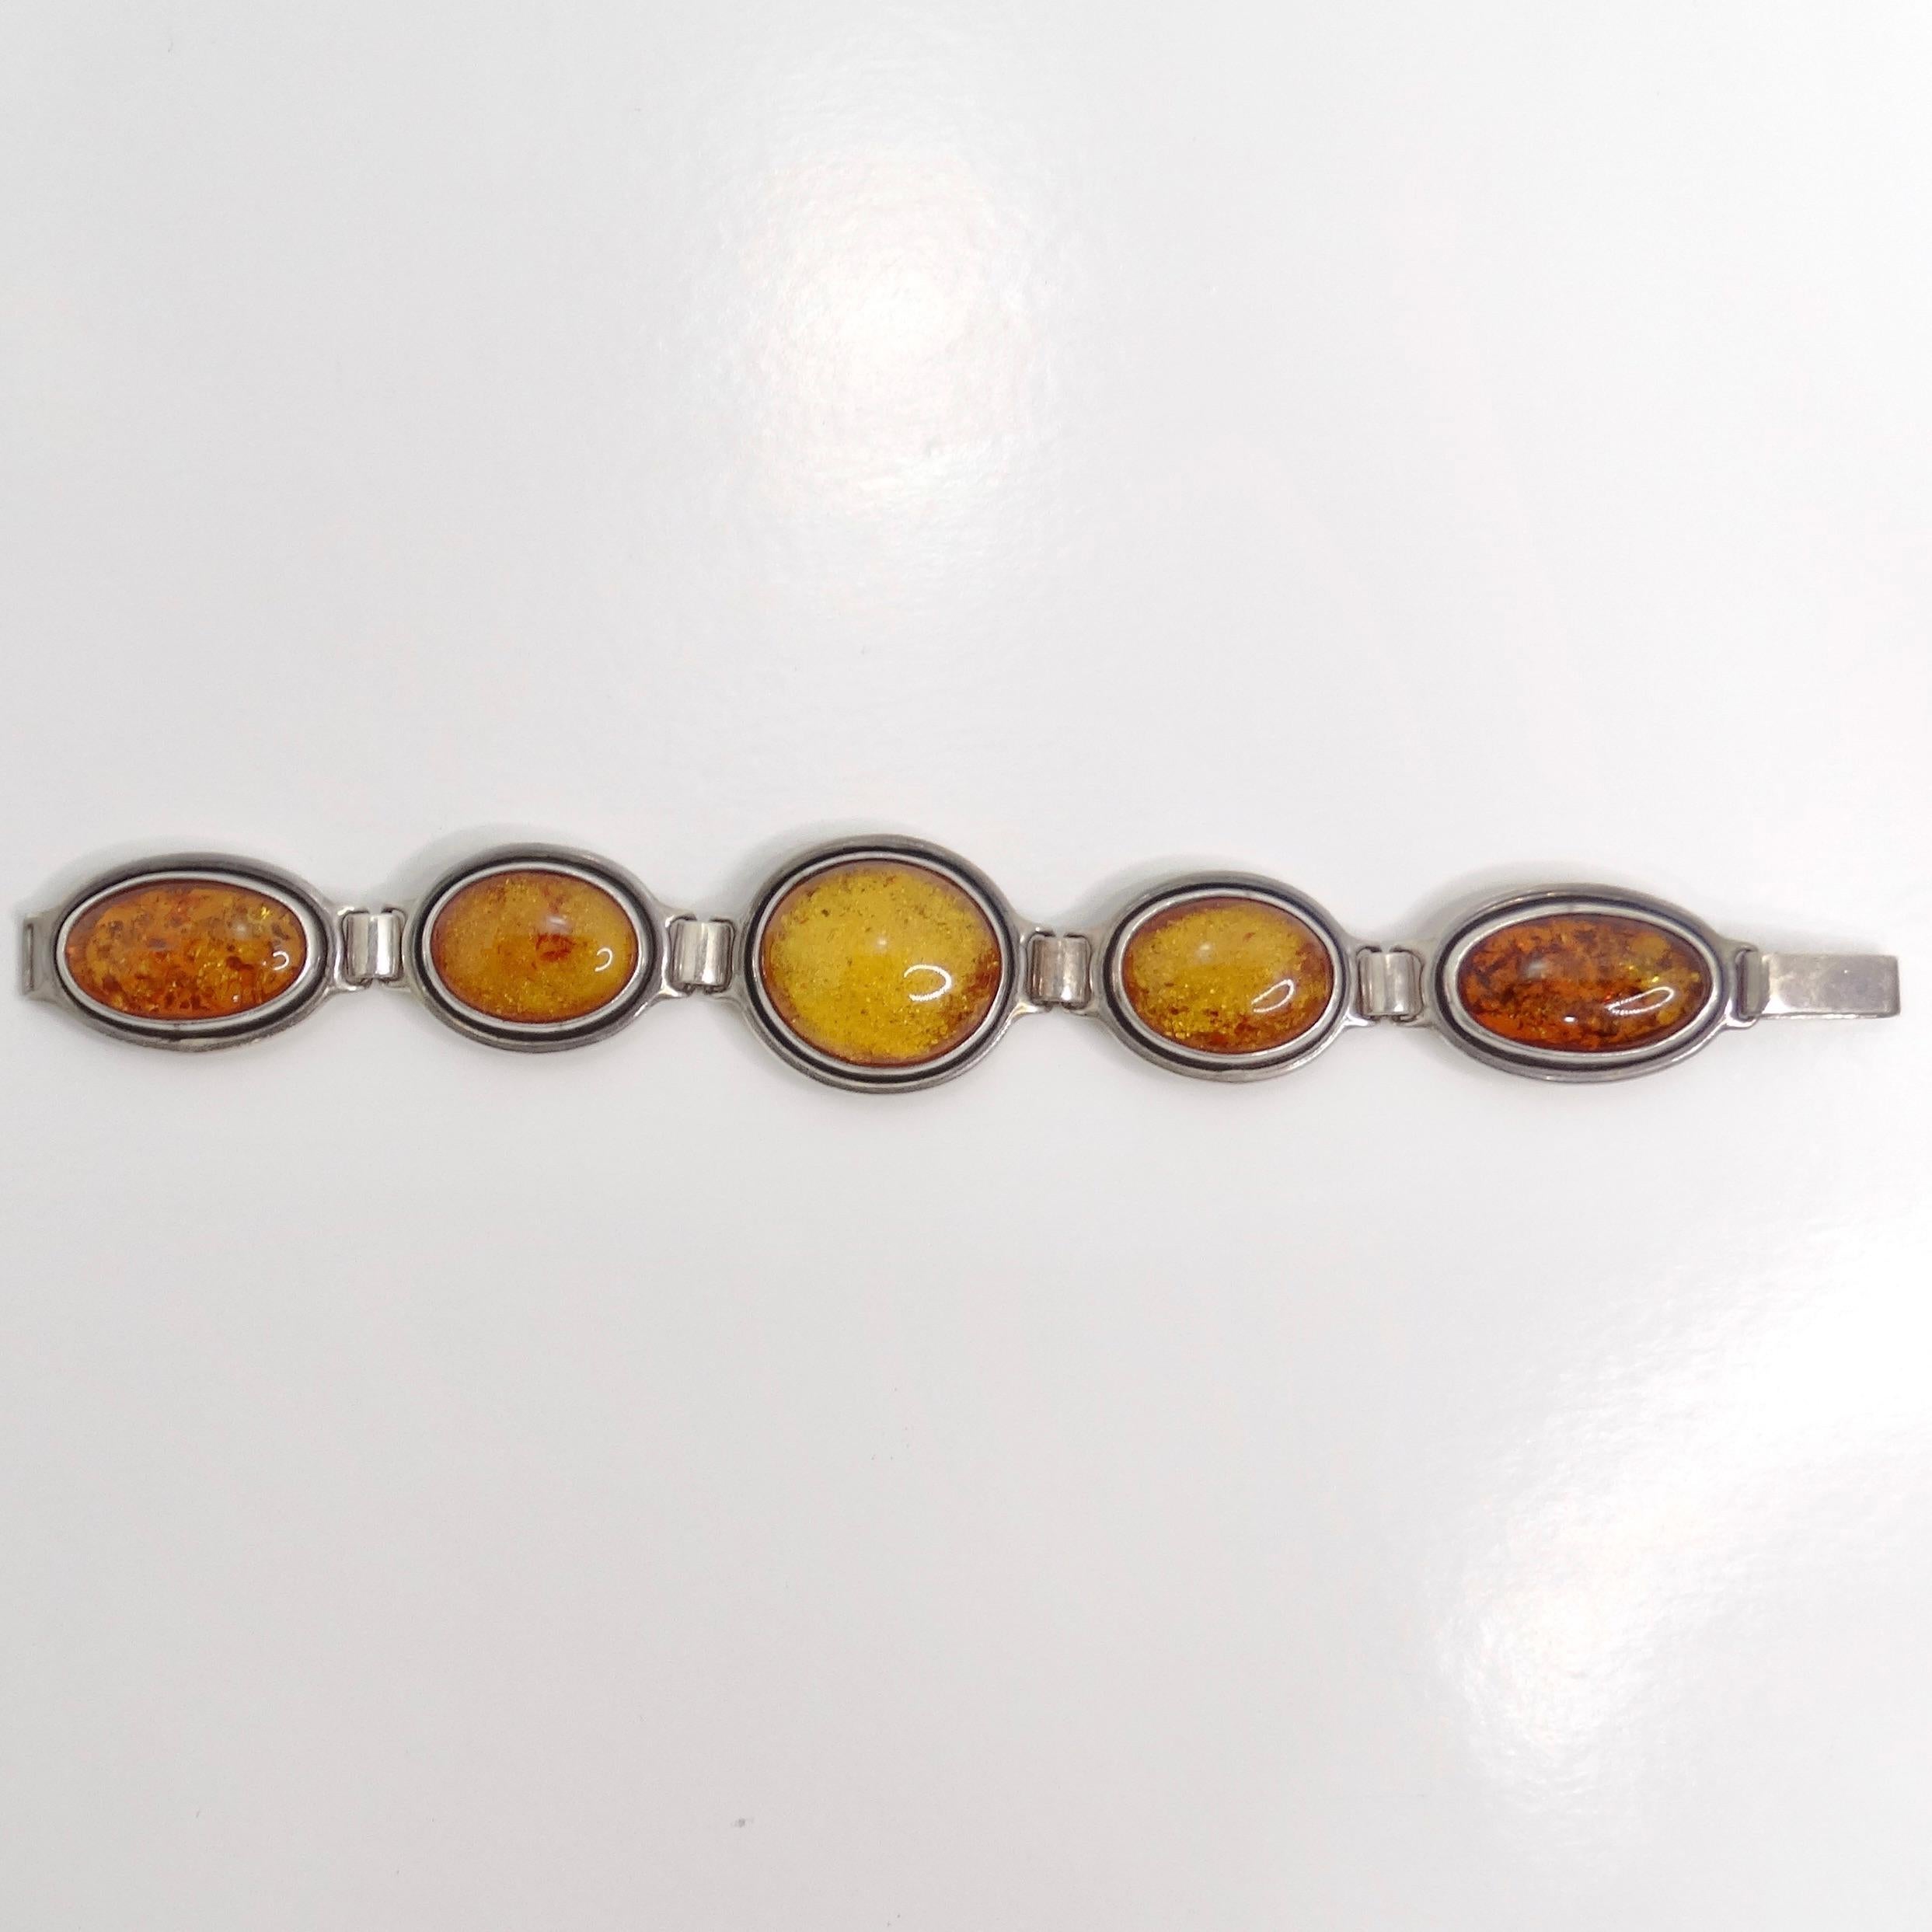 Introducing the 1970s Amber Silver Bracelet, a stunning vintage piece that combines vibrant color with elegant craftsmanship. This beautiful bracelet features five striking orange amber stones, each uniquely set in a handcrafted silver frame. The